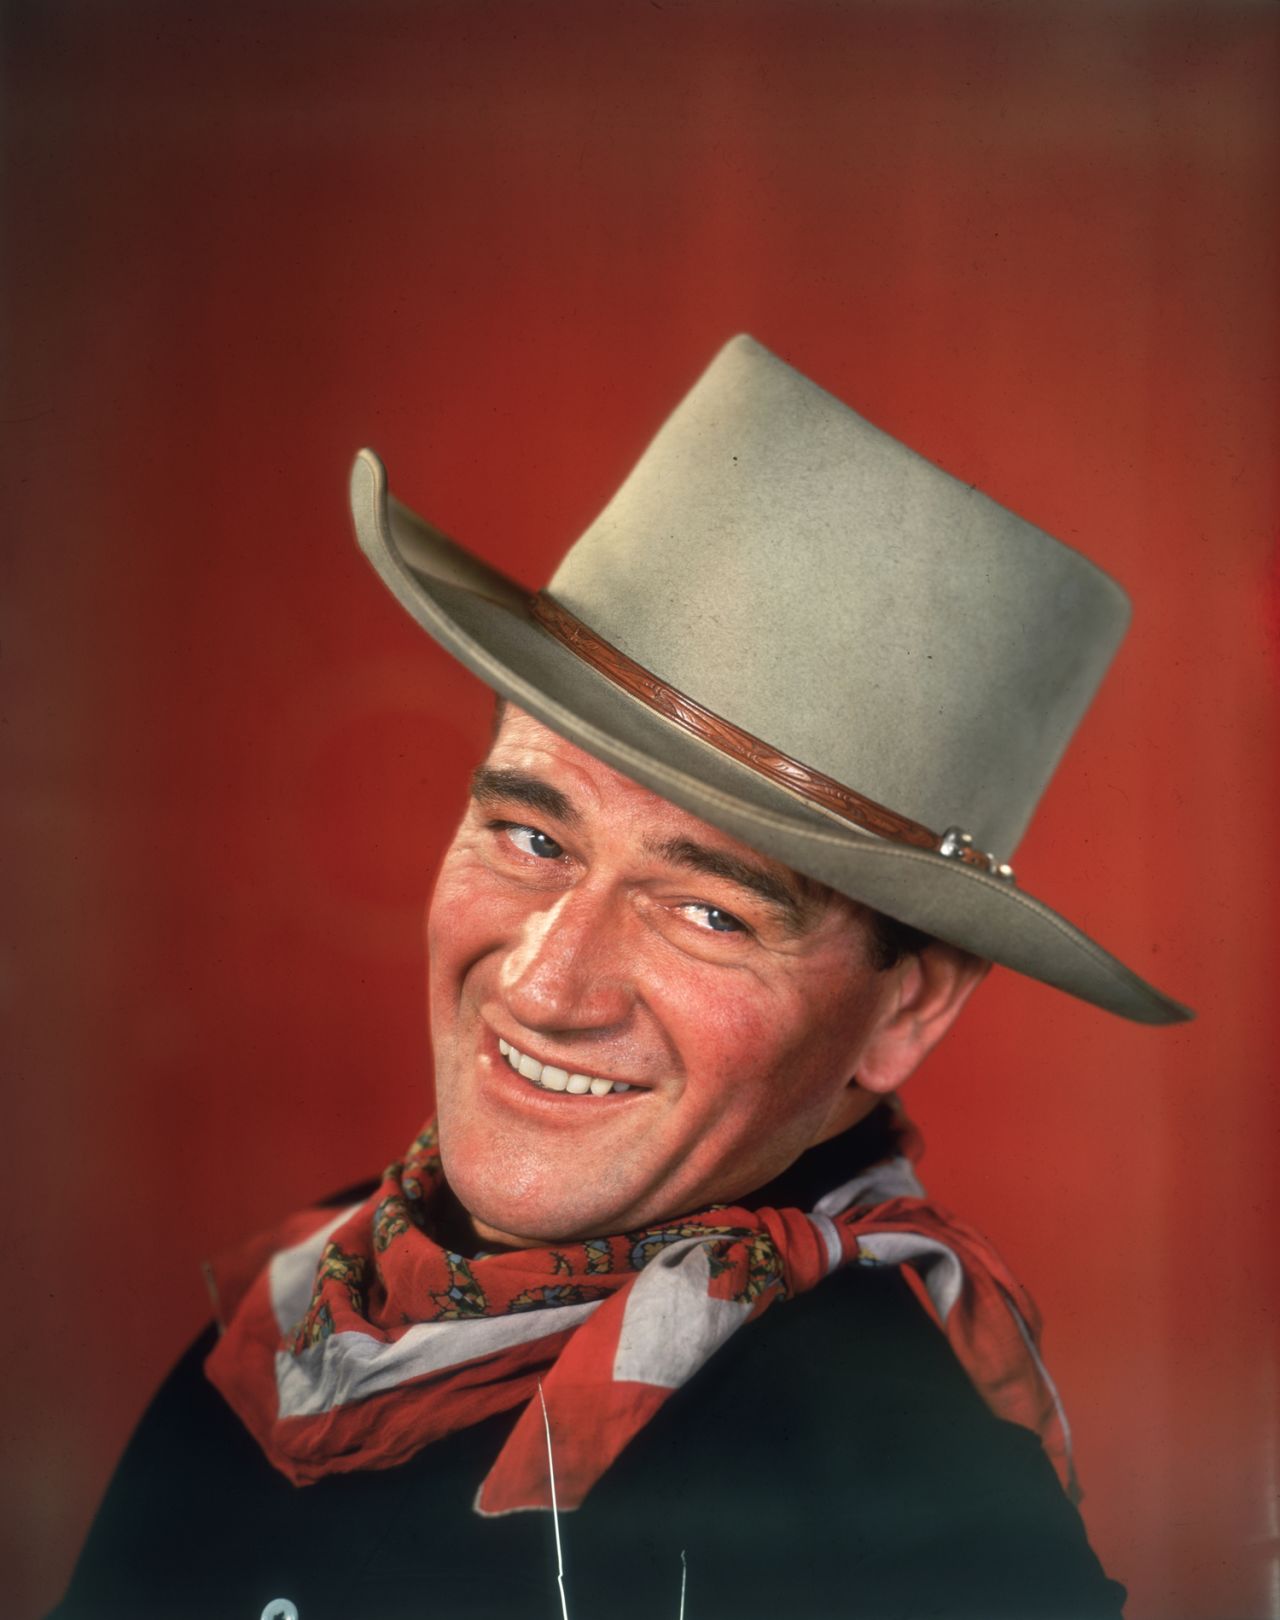 John Wayne's politics generally ran conservative (although he reportedly voted for FDR in 1936). He supported Nixon for president, but when Kennedy won, he said, "I didn't vote for him, but he's my president, and I hope he does a good job." He supported Ronald Reagan for governor of California and was encouraged by Republican backers to run for national office in 1968. He declined.